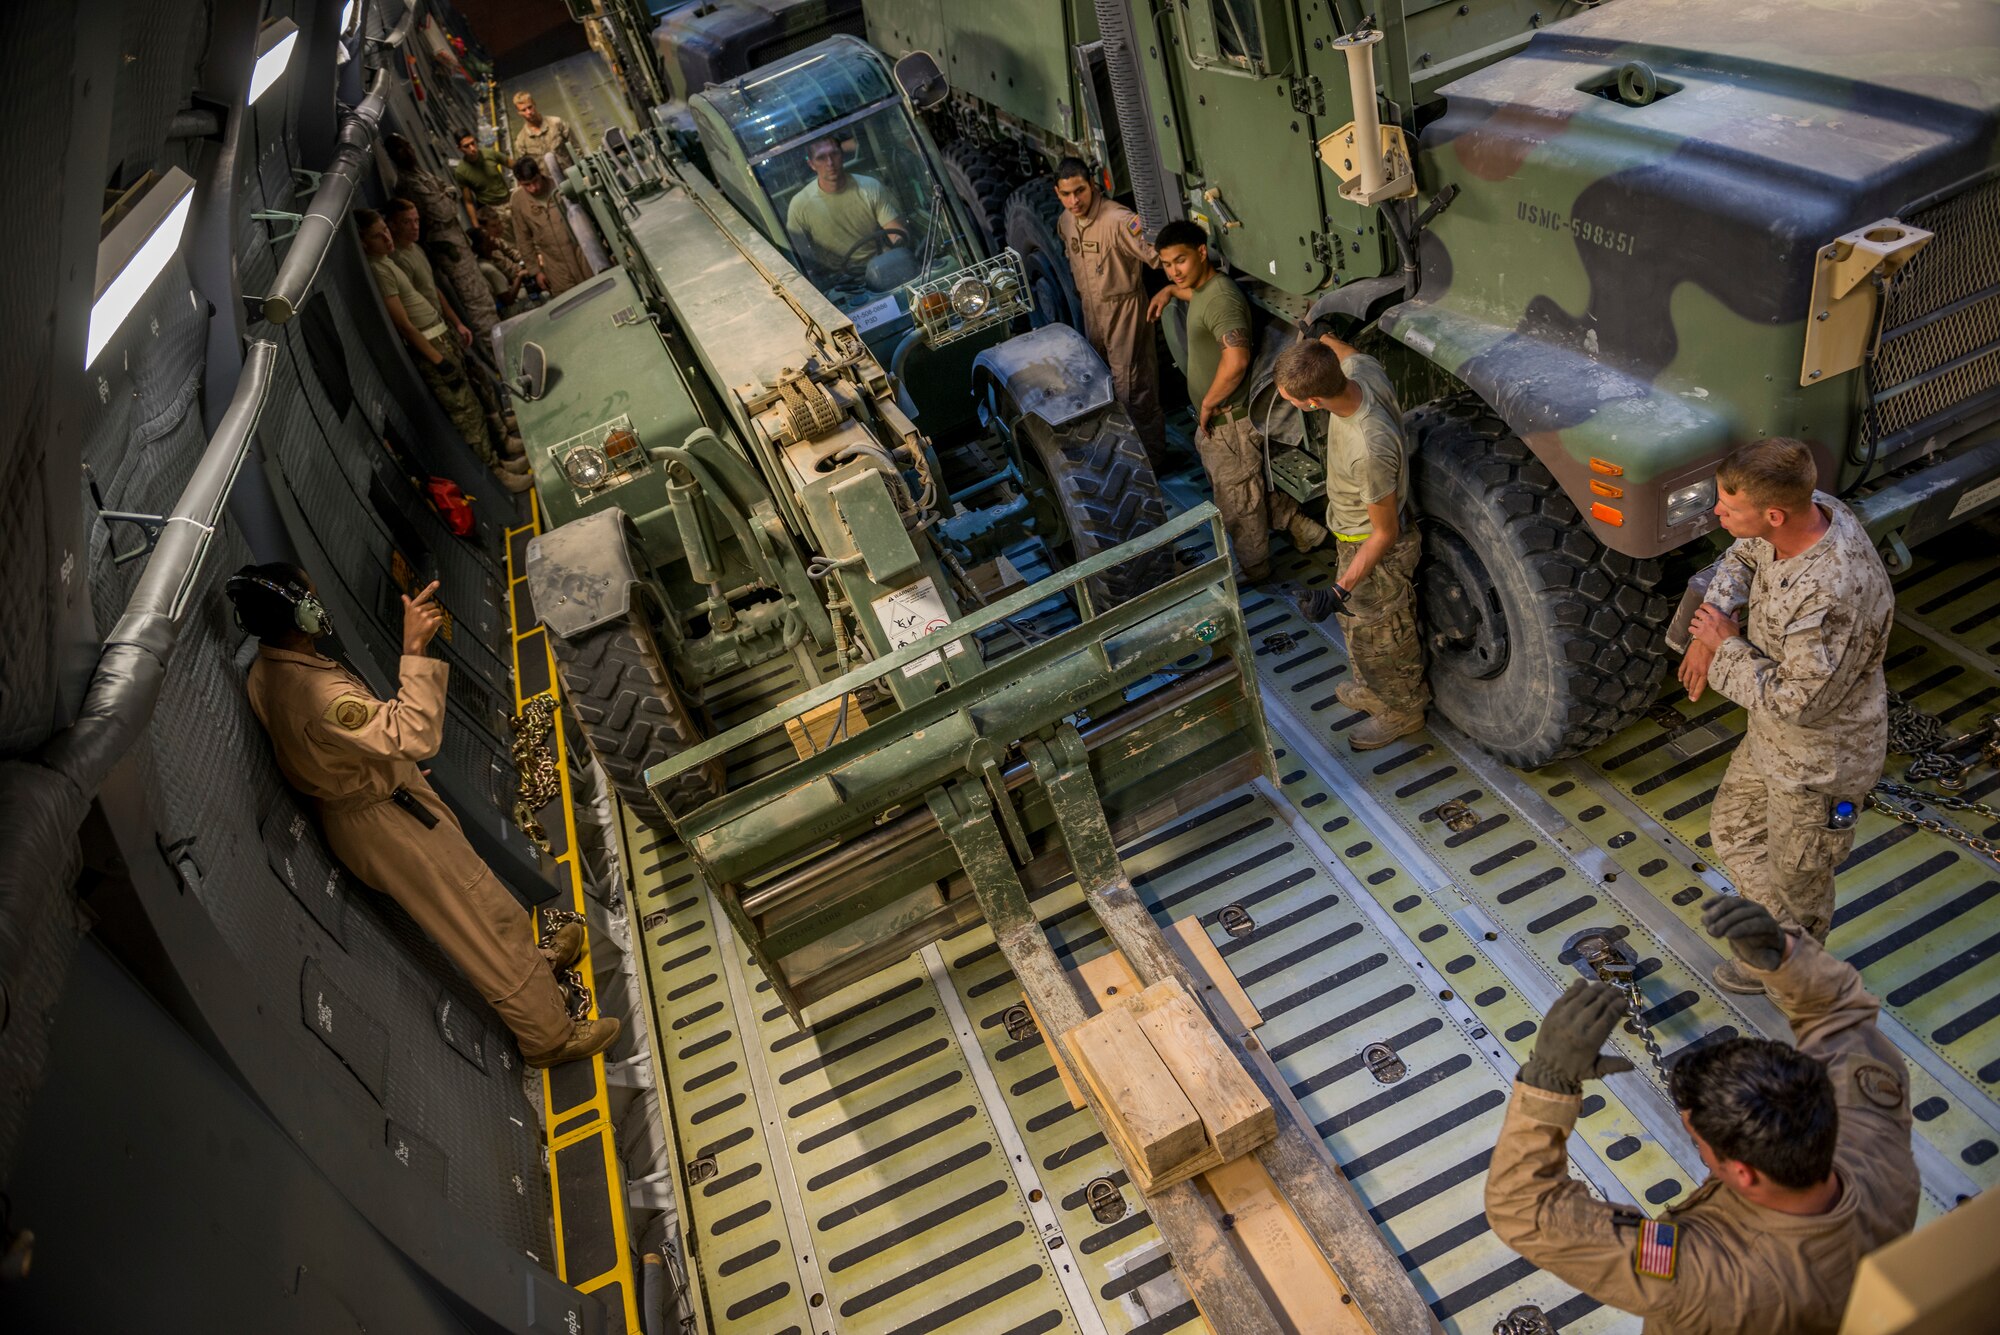 Airmen from the 9th Airlift Squadron and 455th Expeditionary Aerial Port Squadron with Marines from the Marine Expeditionary Brigade prepare to load vehicles into a C-5M Super Galaxy Oct. 6, 2014 at Camp Bastion, Afghanistan. Airmen and Marines loaded more than 266,000 pounds of cargo onto the C-5M as part of retrograde operations in Afghanistan. Aircrews for the retrograde operations, managed by the 385th Air Expeditionary Group Detachment 1, surpassed 11 million pounds of cargo transported in a 50-day period. During this timeframe, crews under the 385th AEG broke Air Mobility Command’s operational cargo load record five times. The heaviest load to date is 280,880 pounds. (U.S. Air Force photo by Staff Sgt. Jeremy Bowcock)